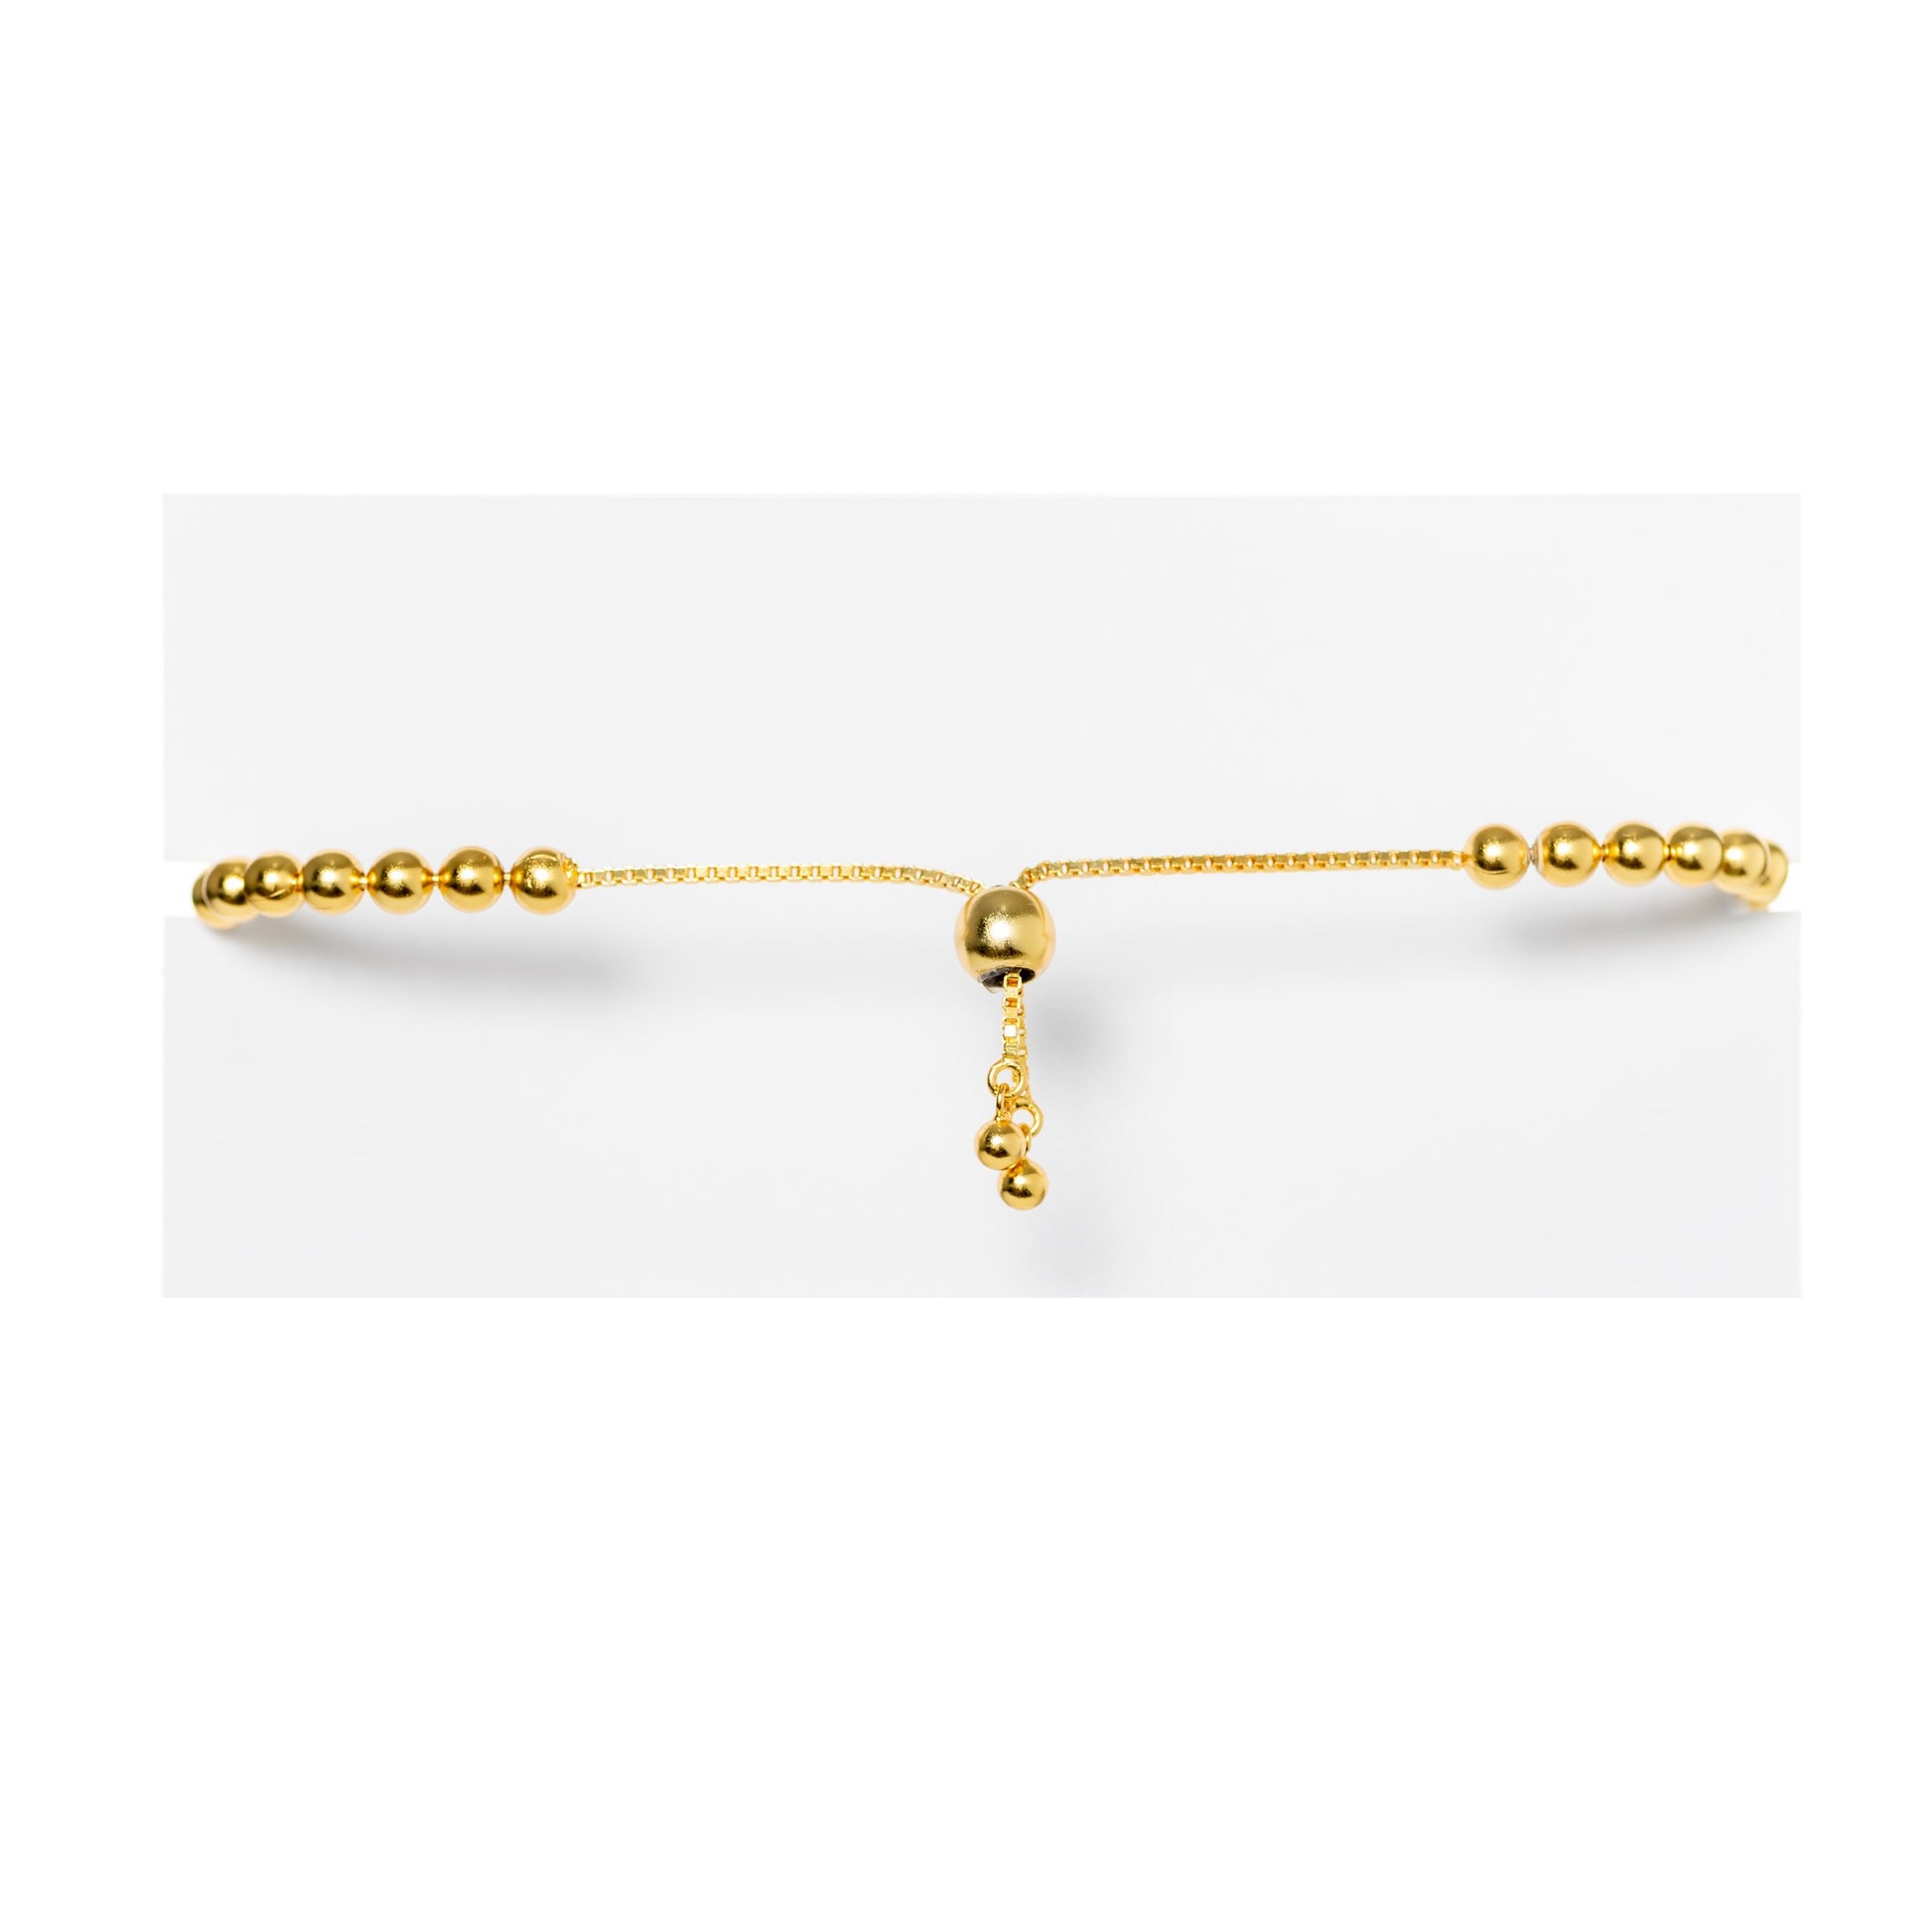 back side cord clasp of gold be kind ball chain bracelet